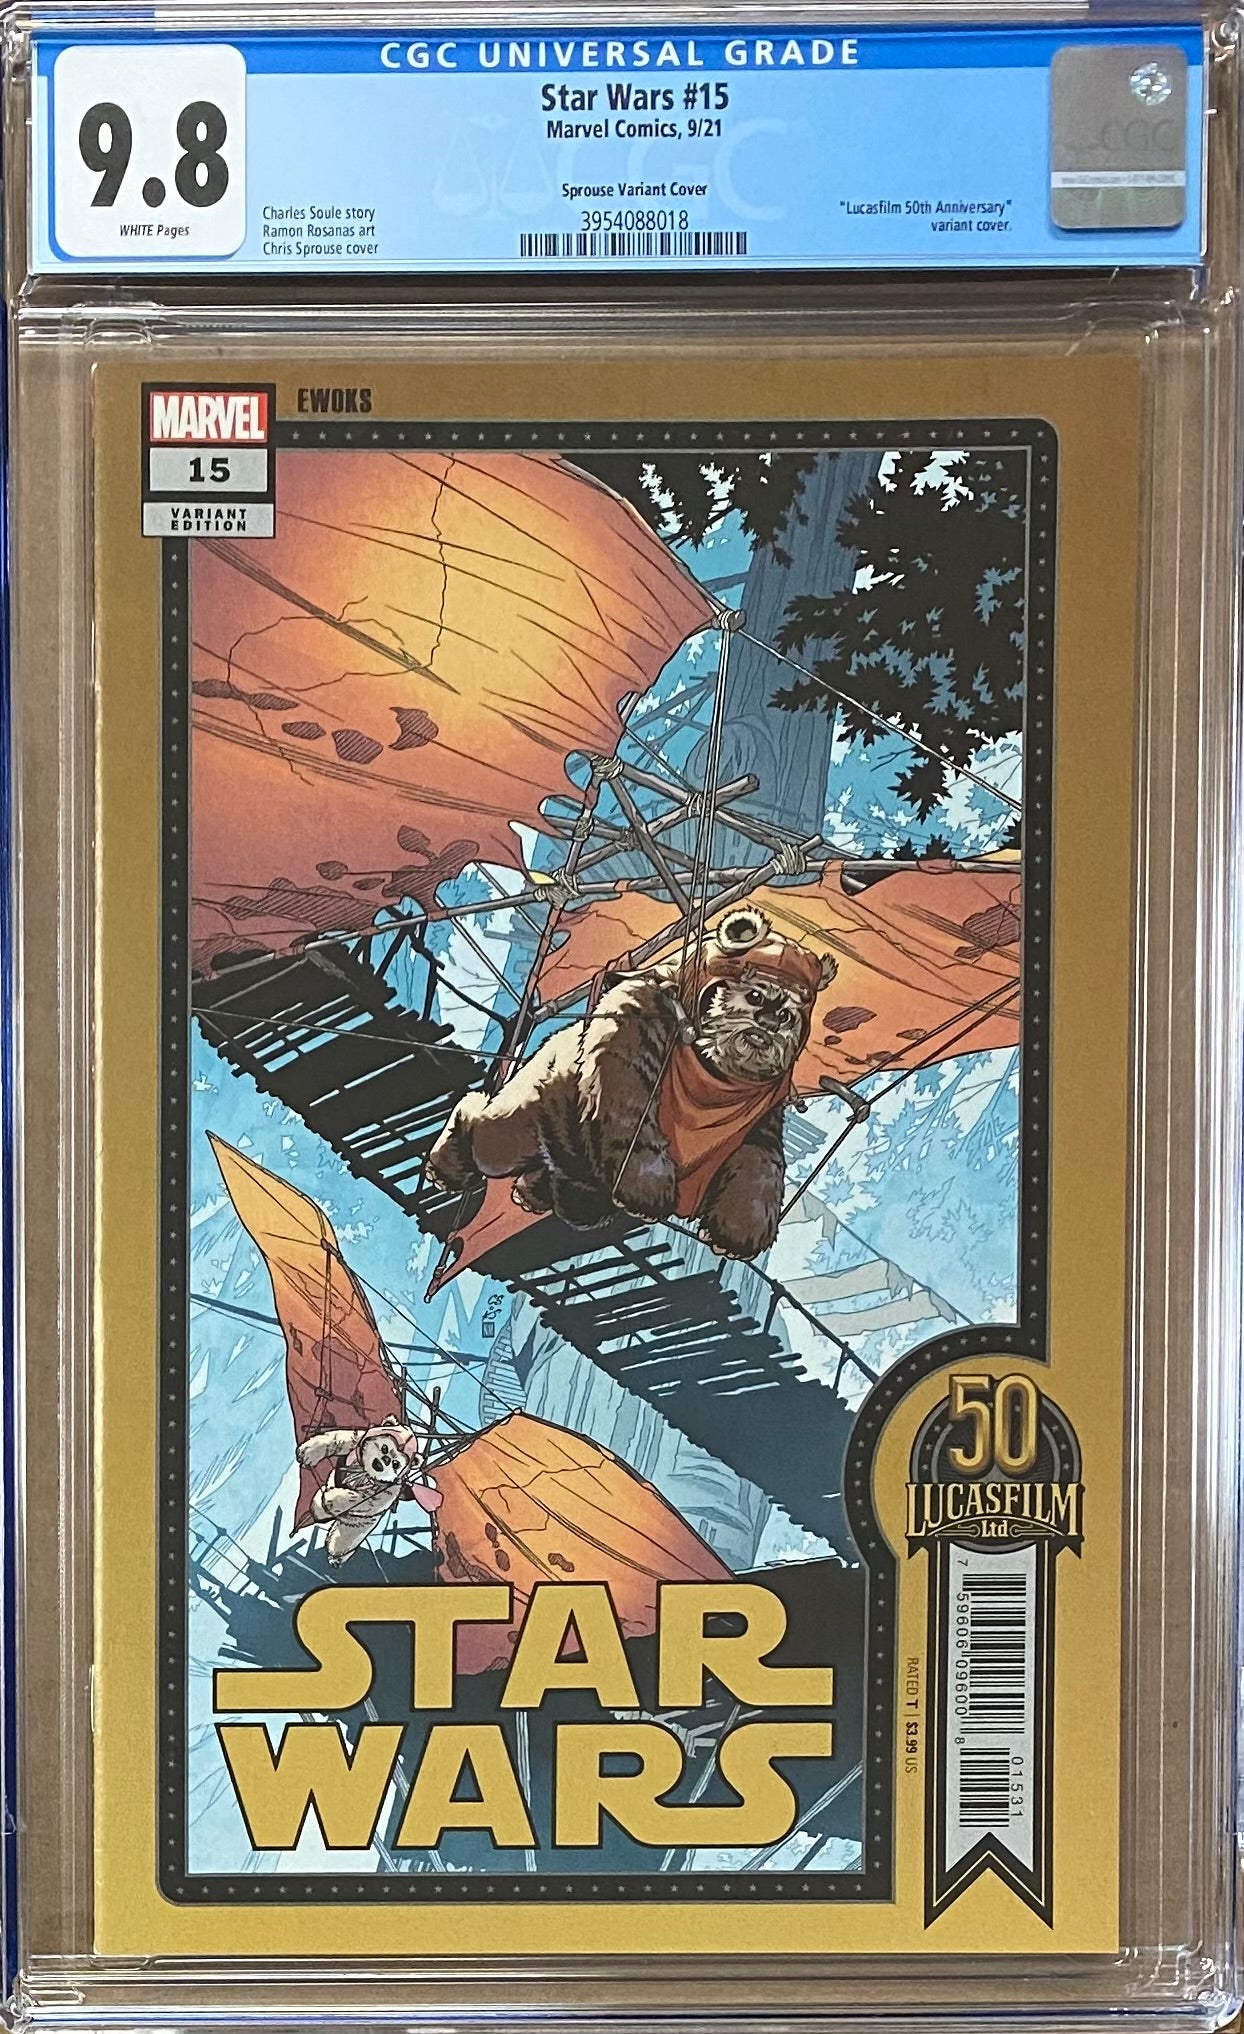 Star Wars #15 Sprouse Variant CGC 9.8 - War of the Bounty Hunters